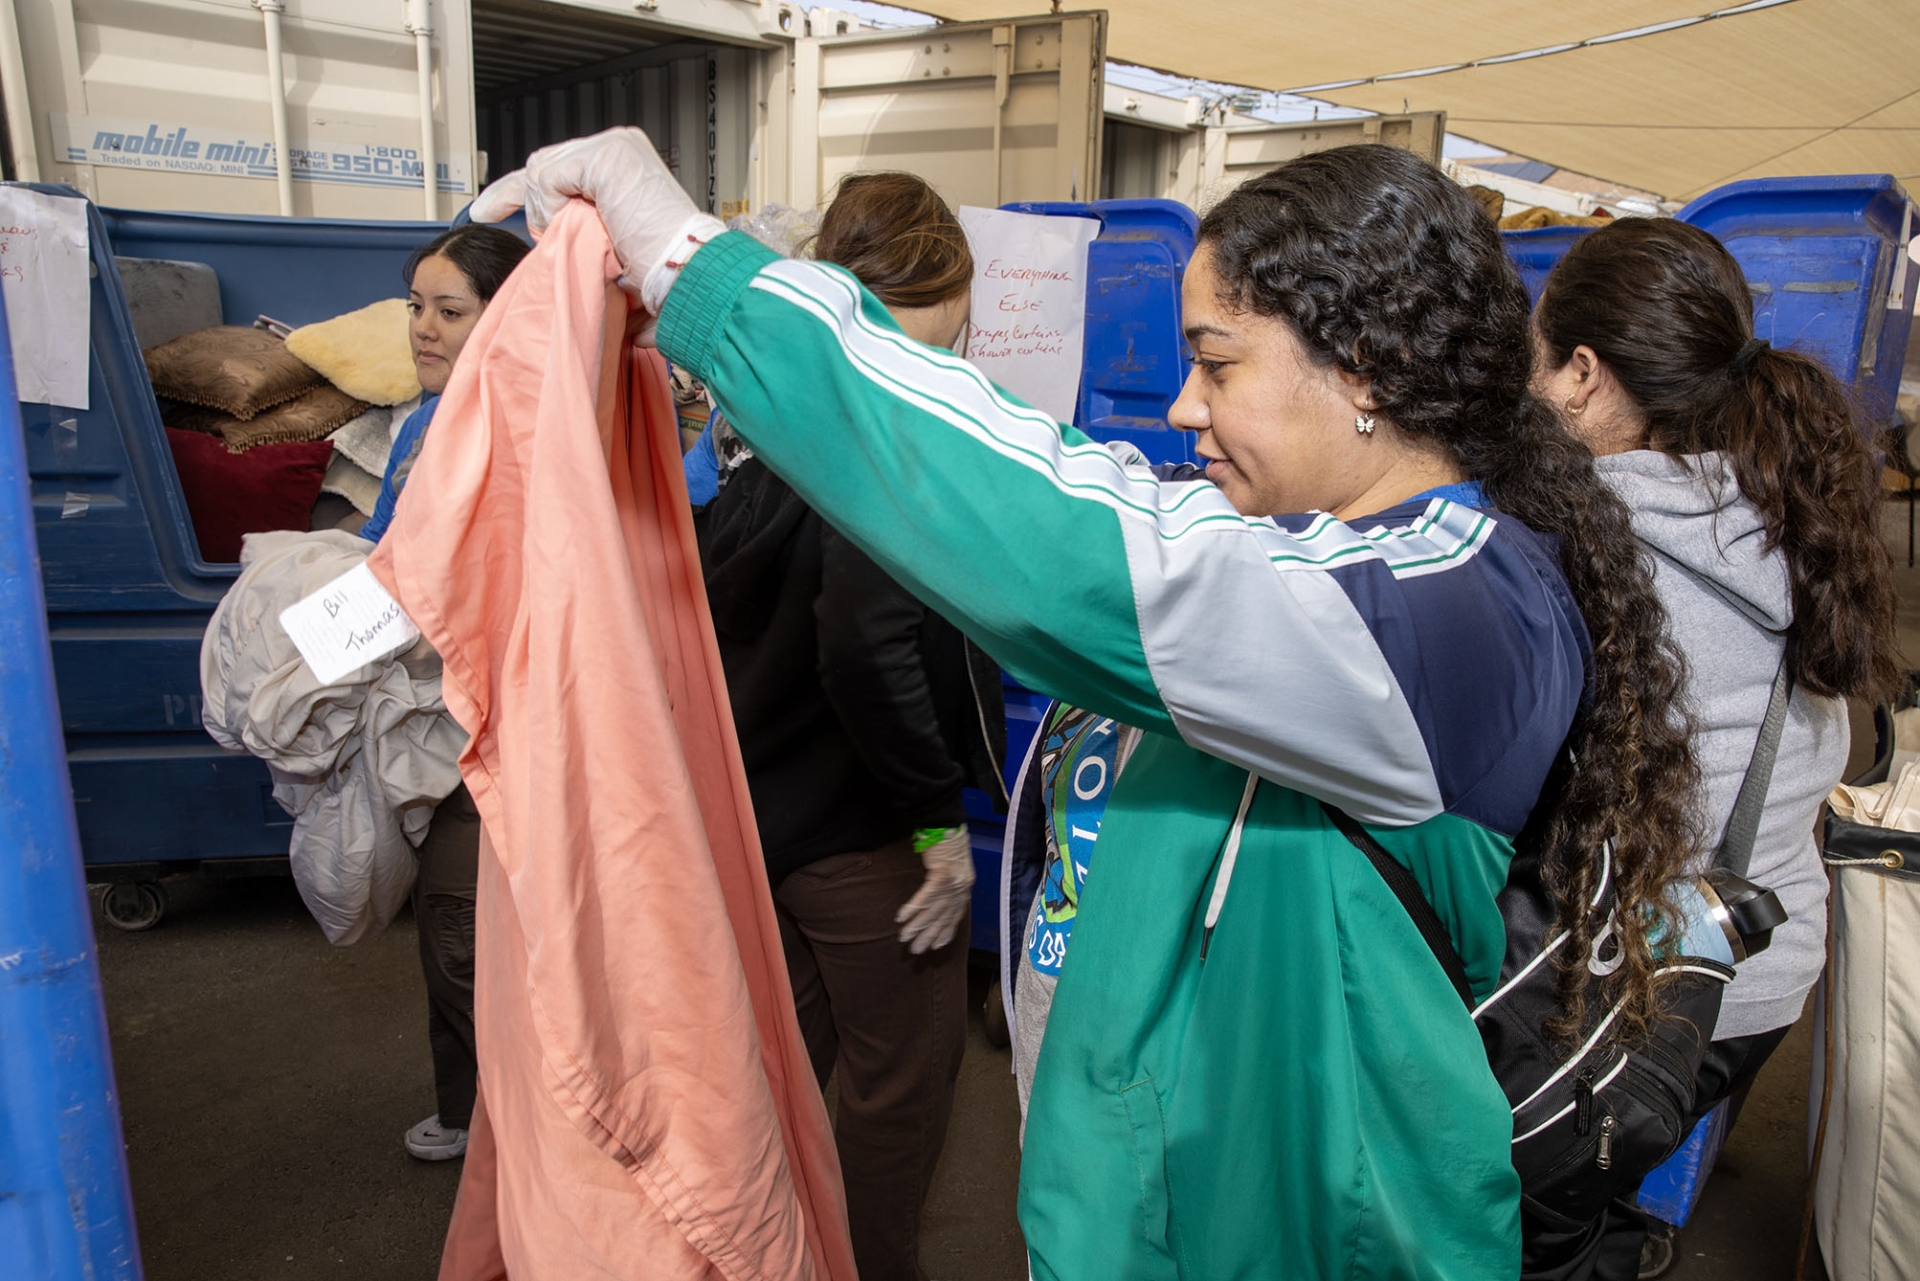 Clothes are sorted and folded at a San Bernardino-area agency during Cal State San Bernardino’s Coyote Cares Day, the university’s annual day of service to the community.